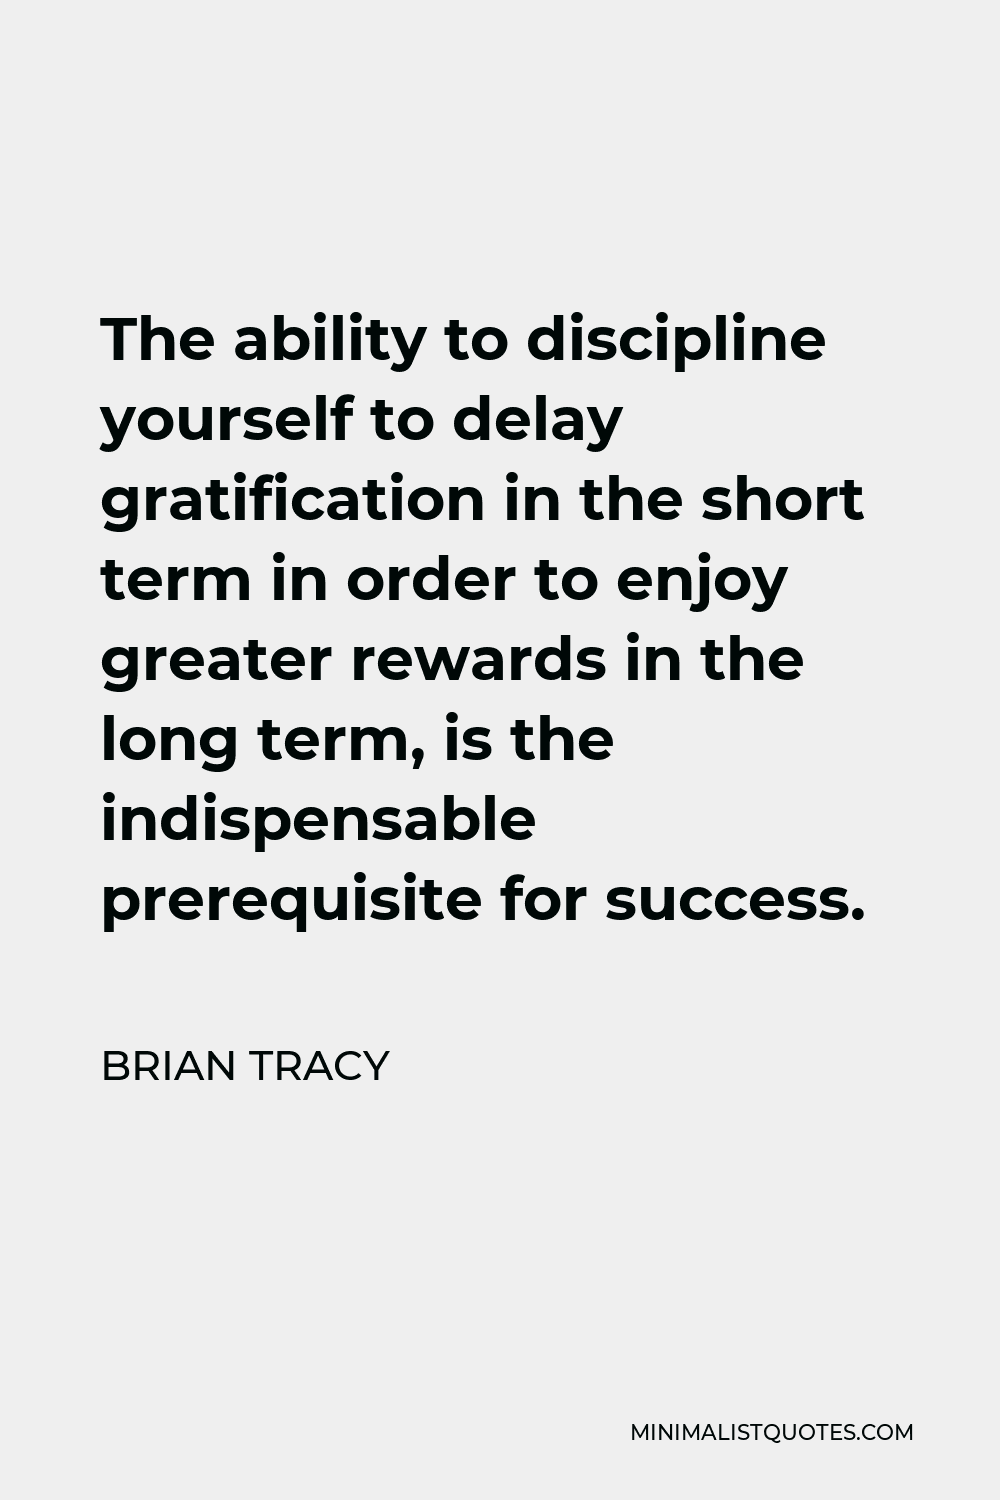 Brian Tracy Quote - The ability to discipline yourself to delay gratification in the short term in order to enjoy greater rewards in the long term, is the indispensable prerequisite for success.